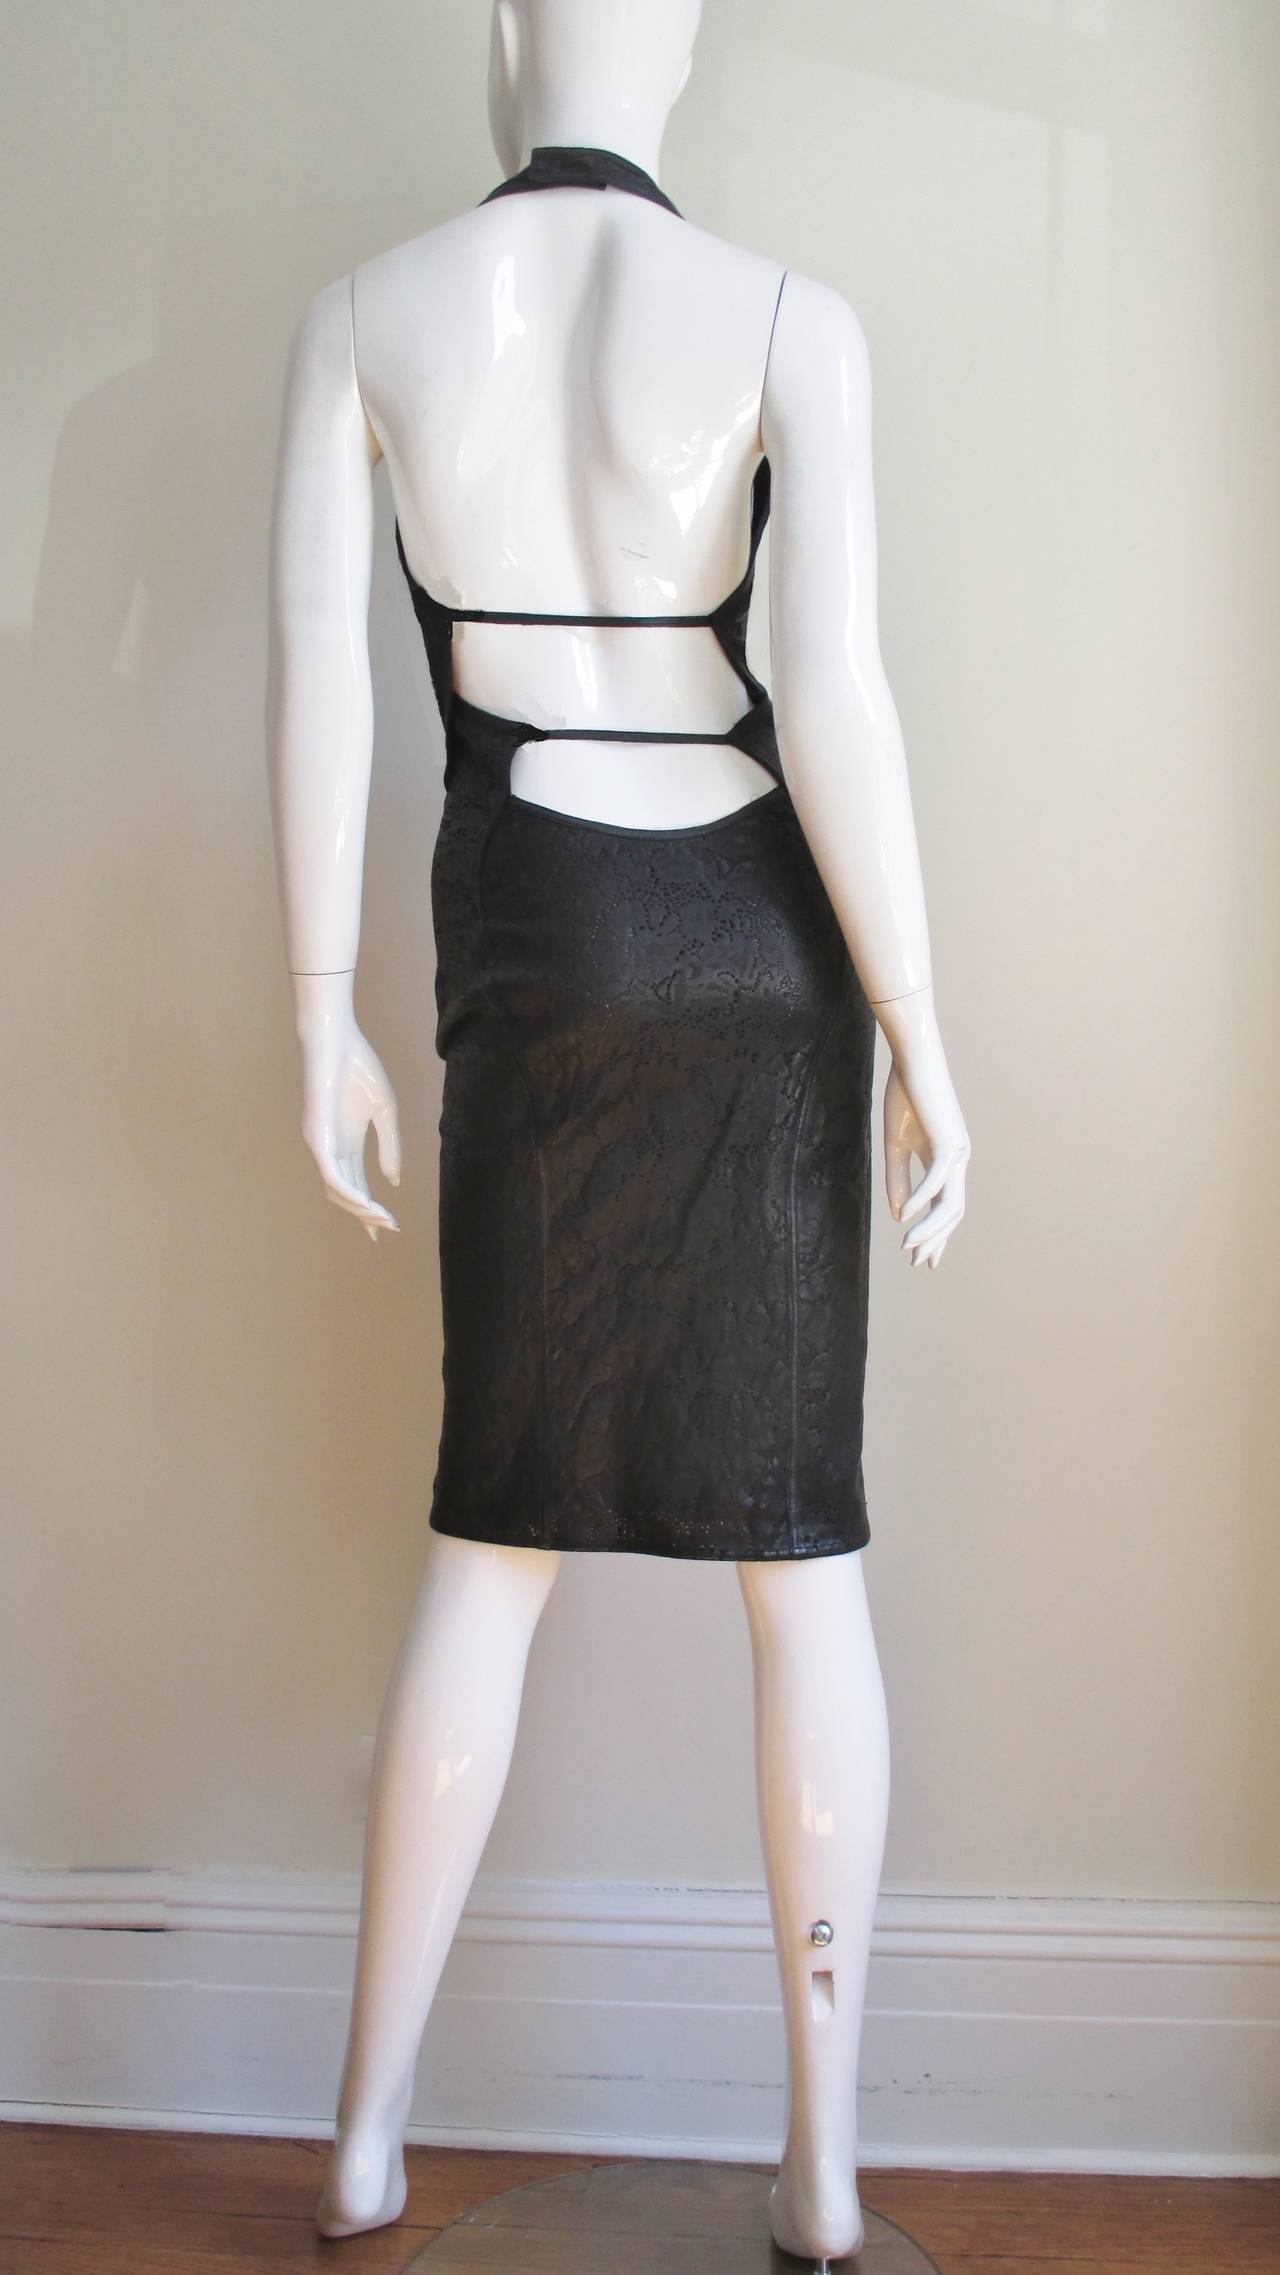 Gianni Versace Laser Perforated Leather Halter Dress 1990s For Sale 4